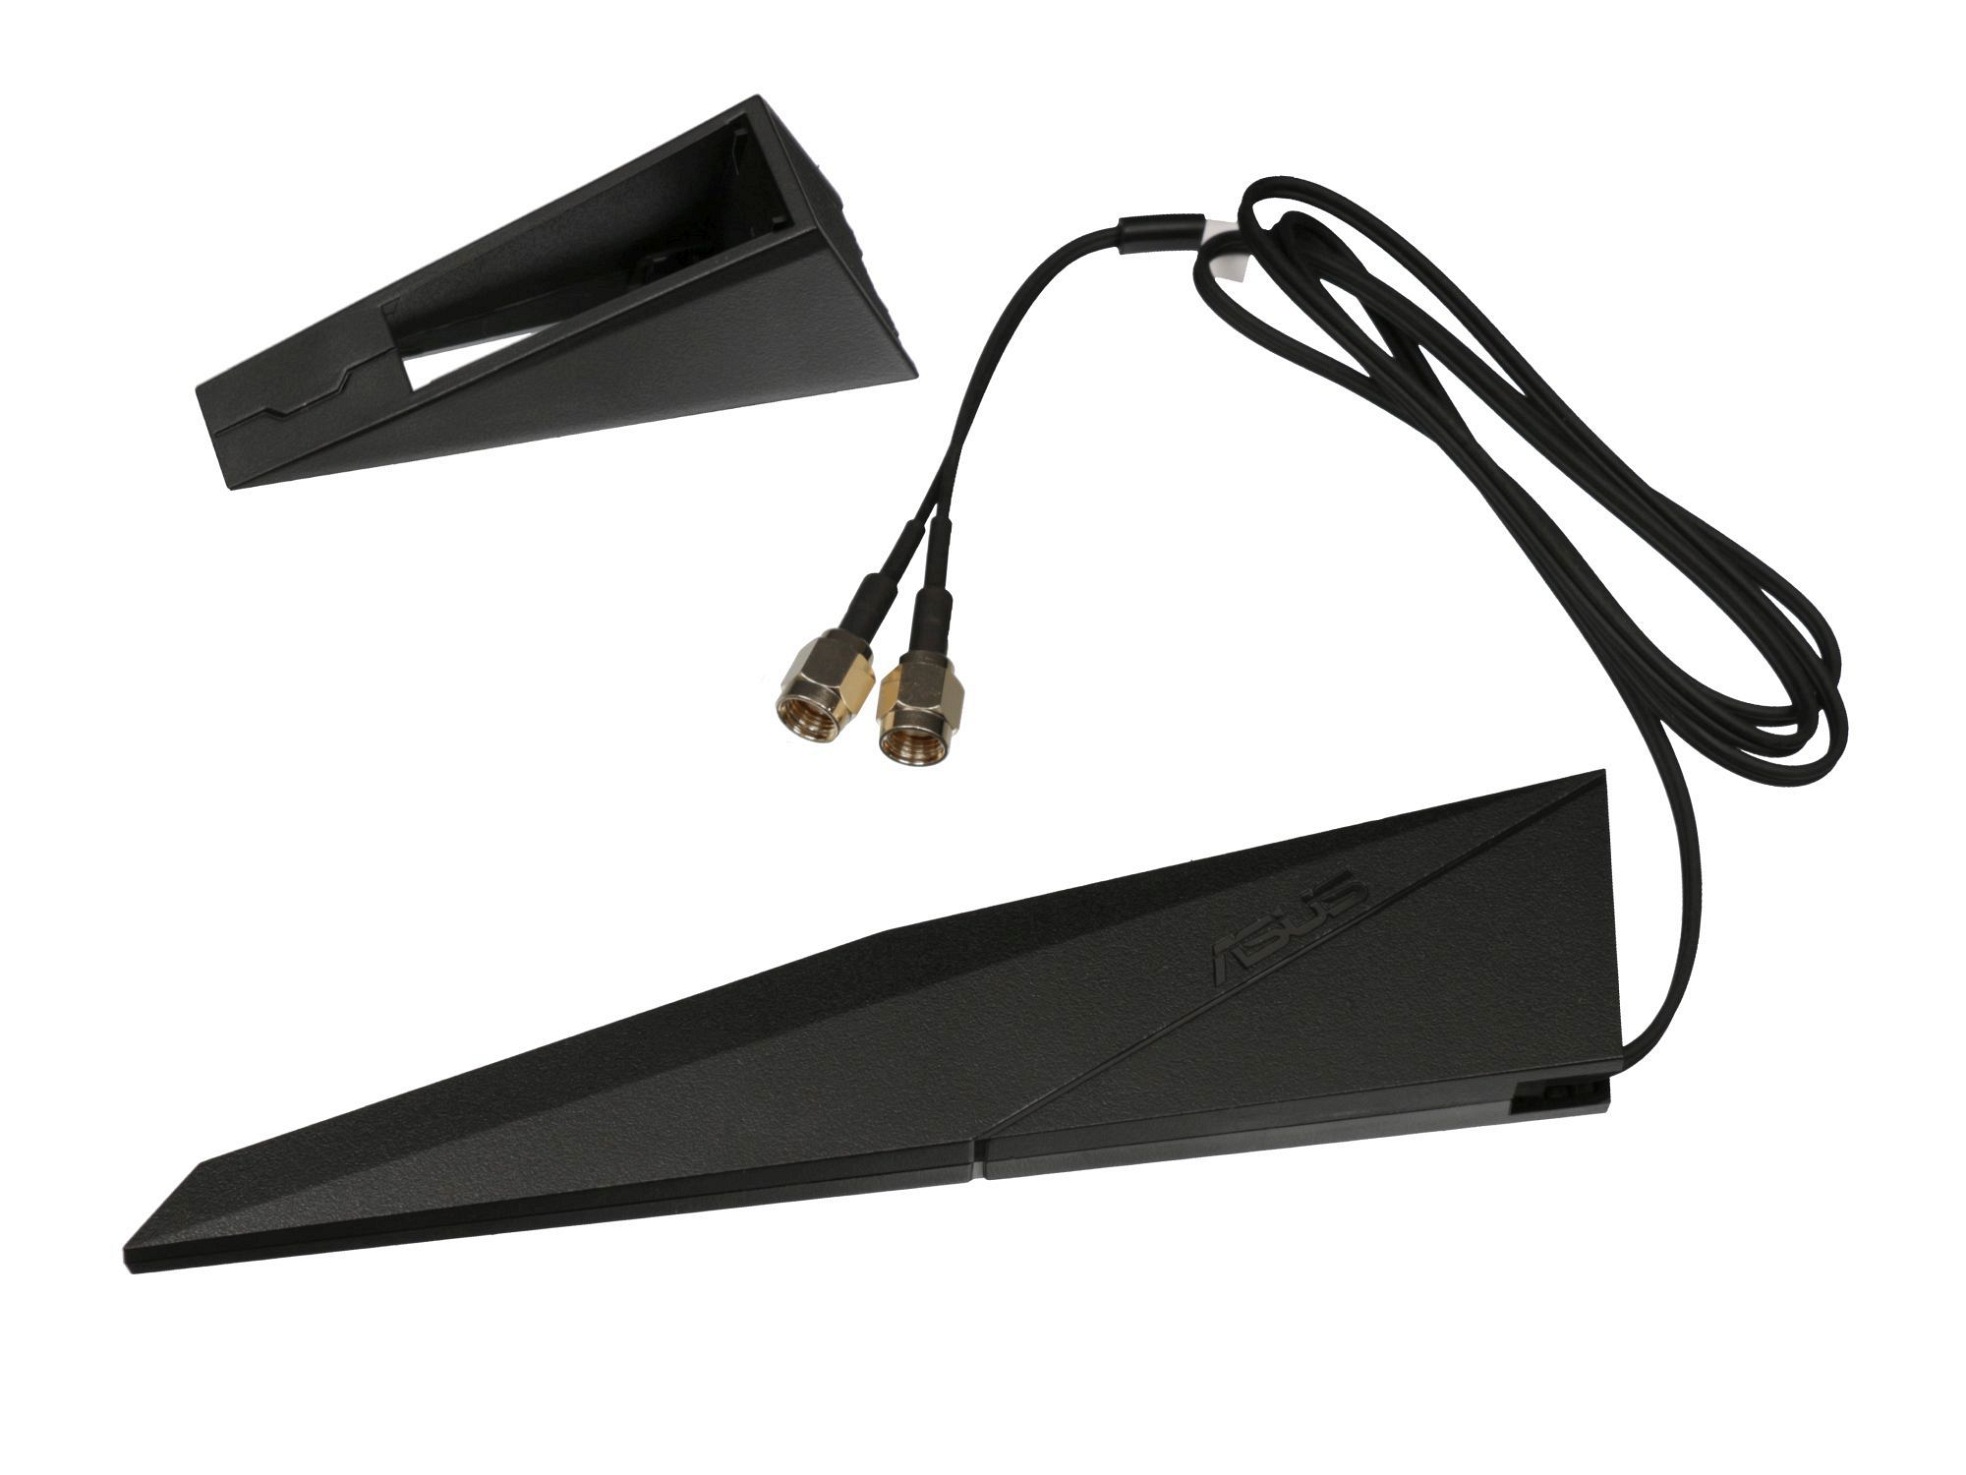 Externe Asus RP-SMA DIPOLE Antenne für Asus TUF GAMING B460-PRO